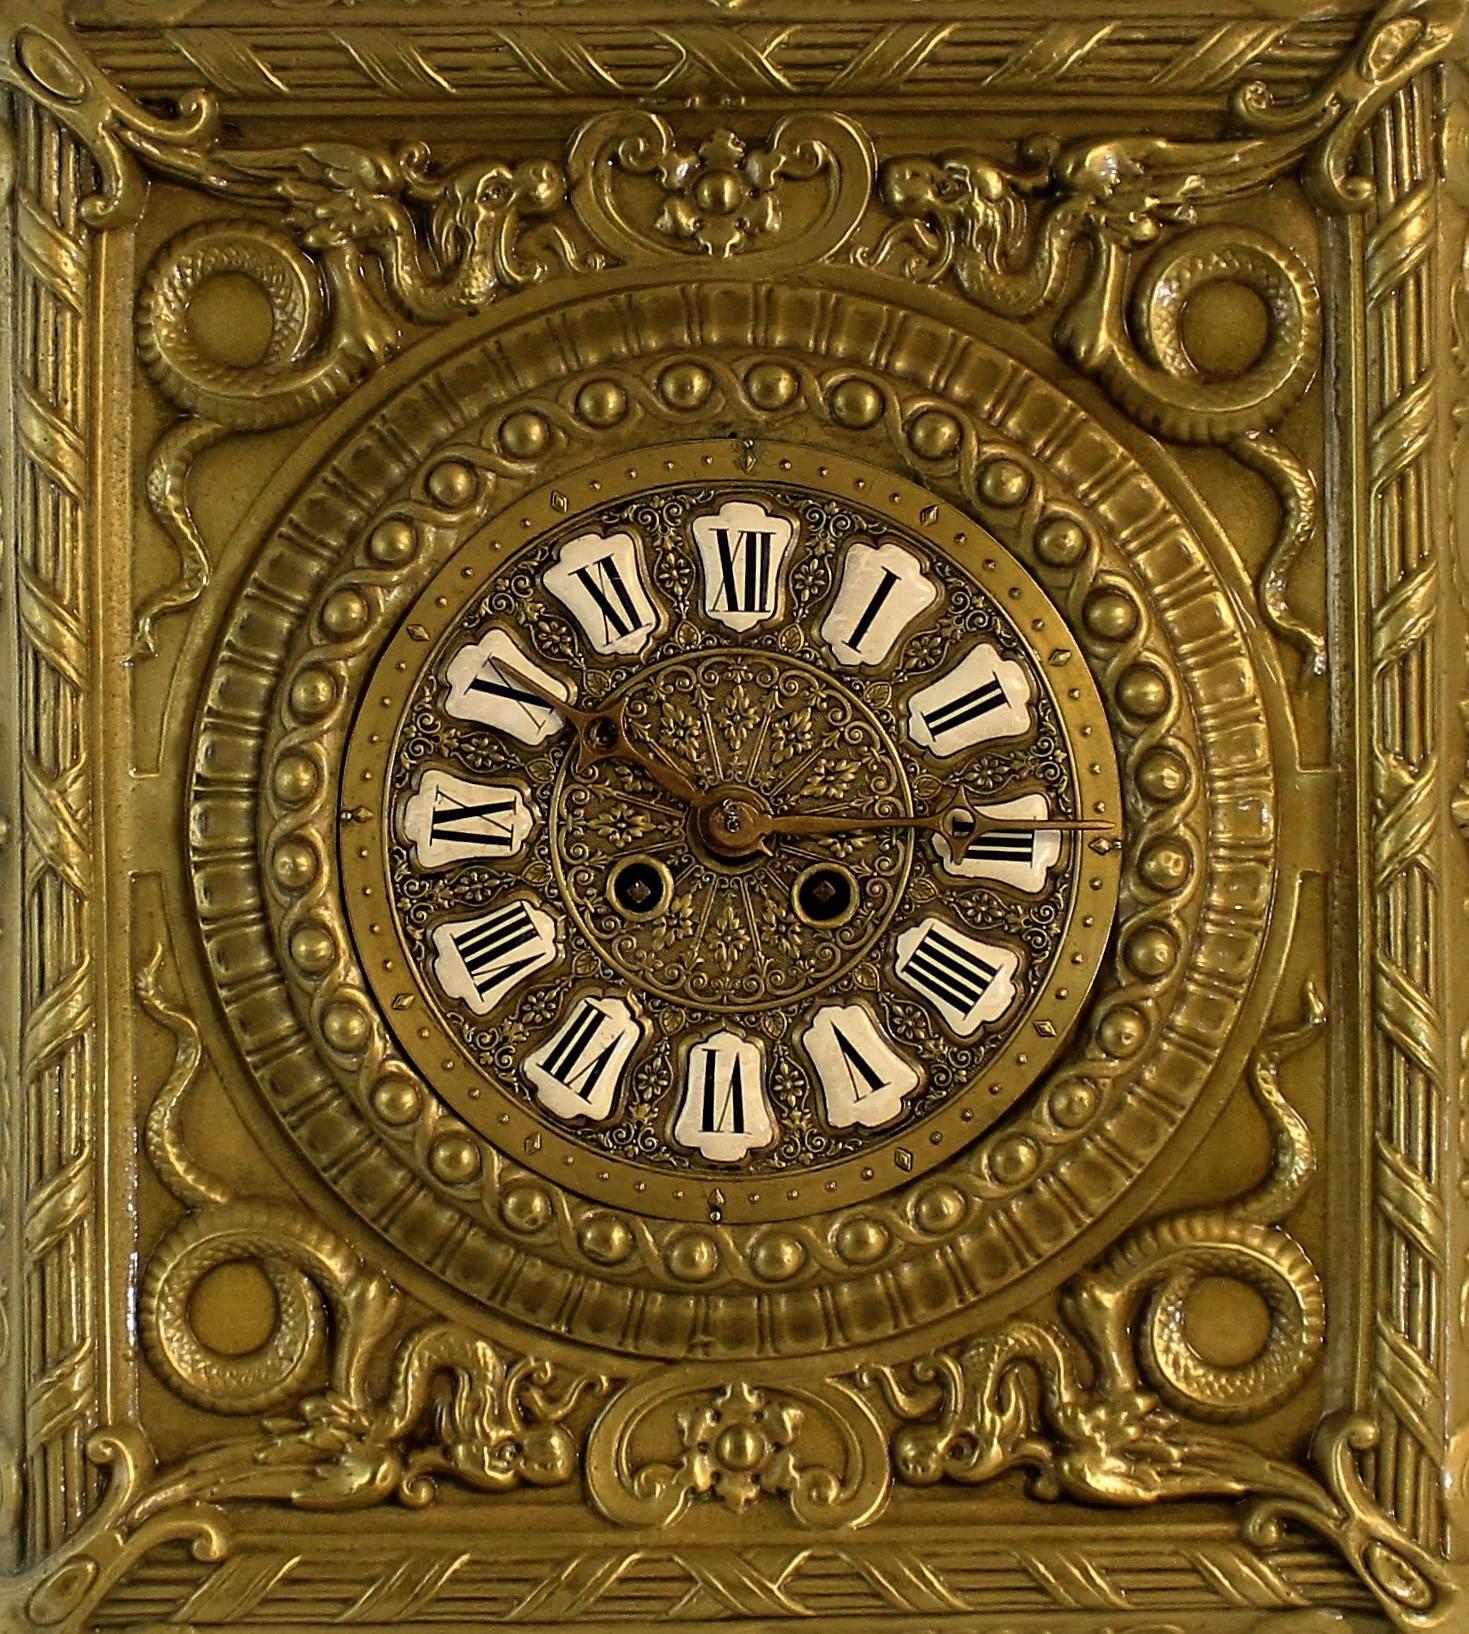 Highly decorative clock which features porcelain numerals, mythical winged serpents, acanthus leaves and a bearded Jester head which sits atop the clock.